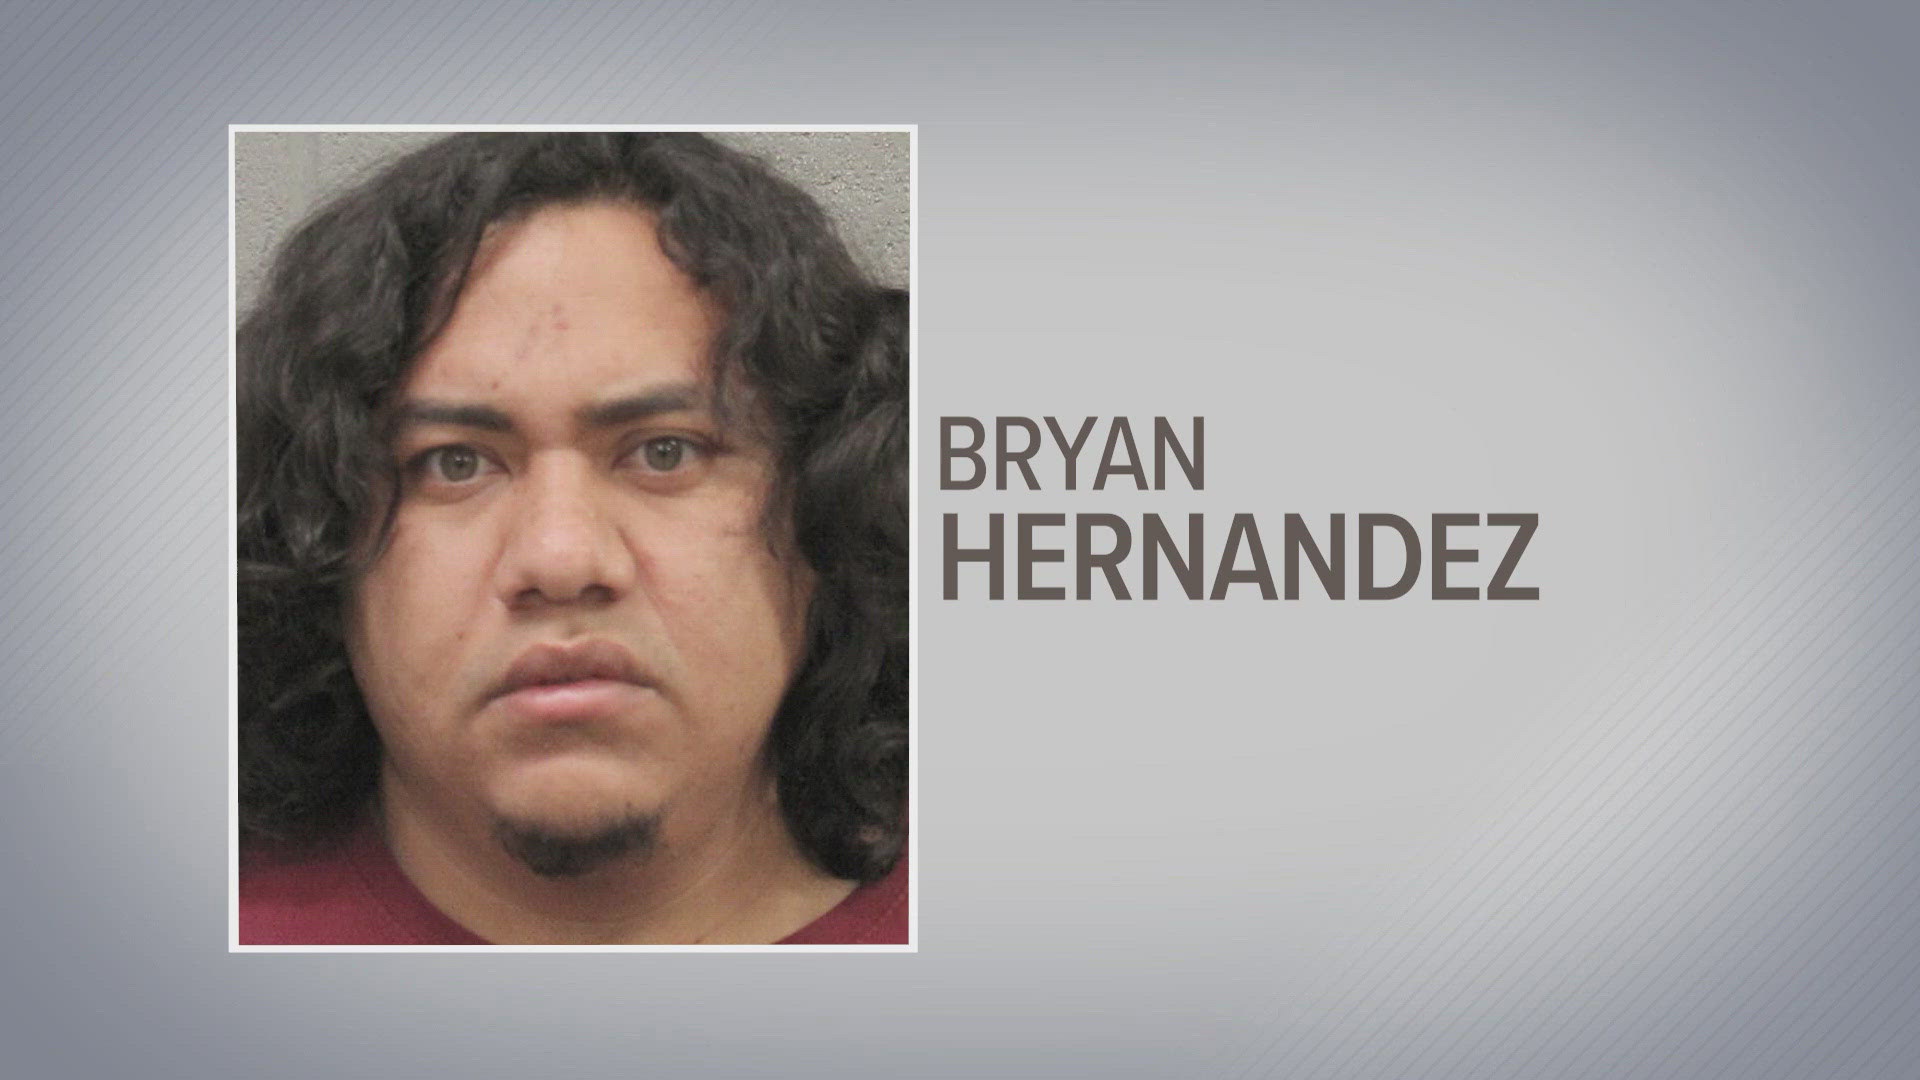 Bryan J. Fernandez Hernandez, 27, has been charged with capital murder in the shooting, police say.